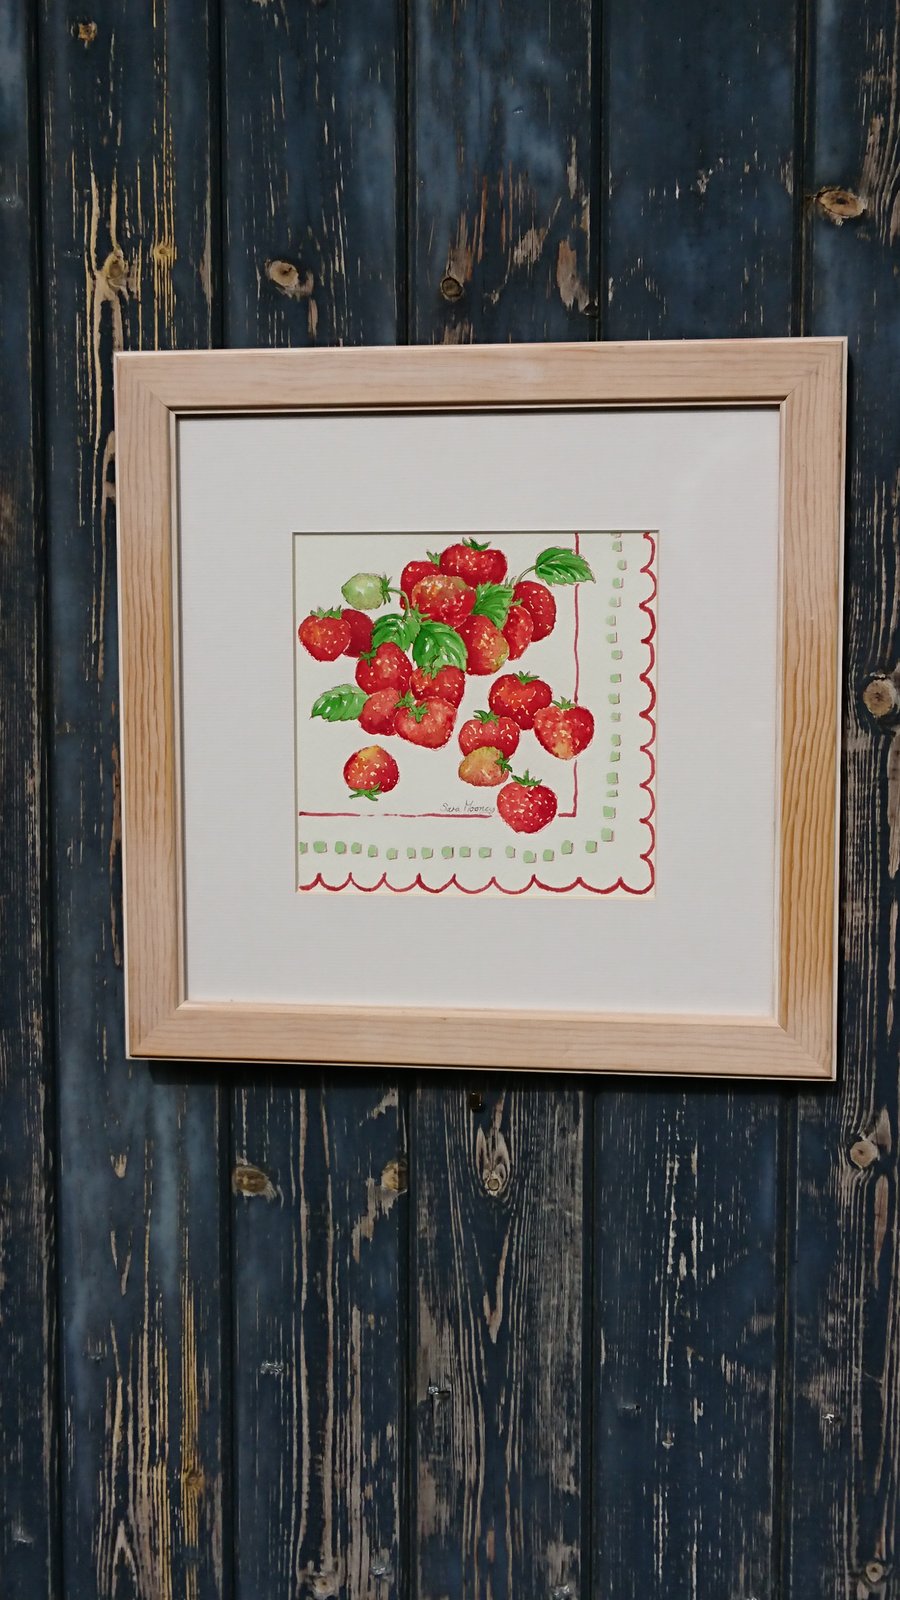 Strawberries on a white cloth original watercolour painting